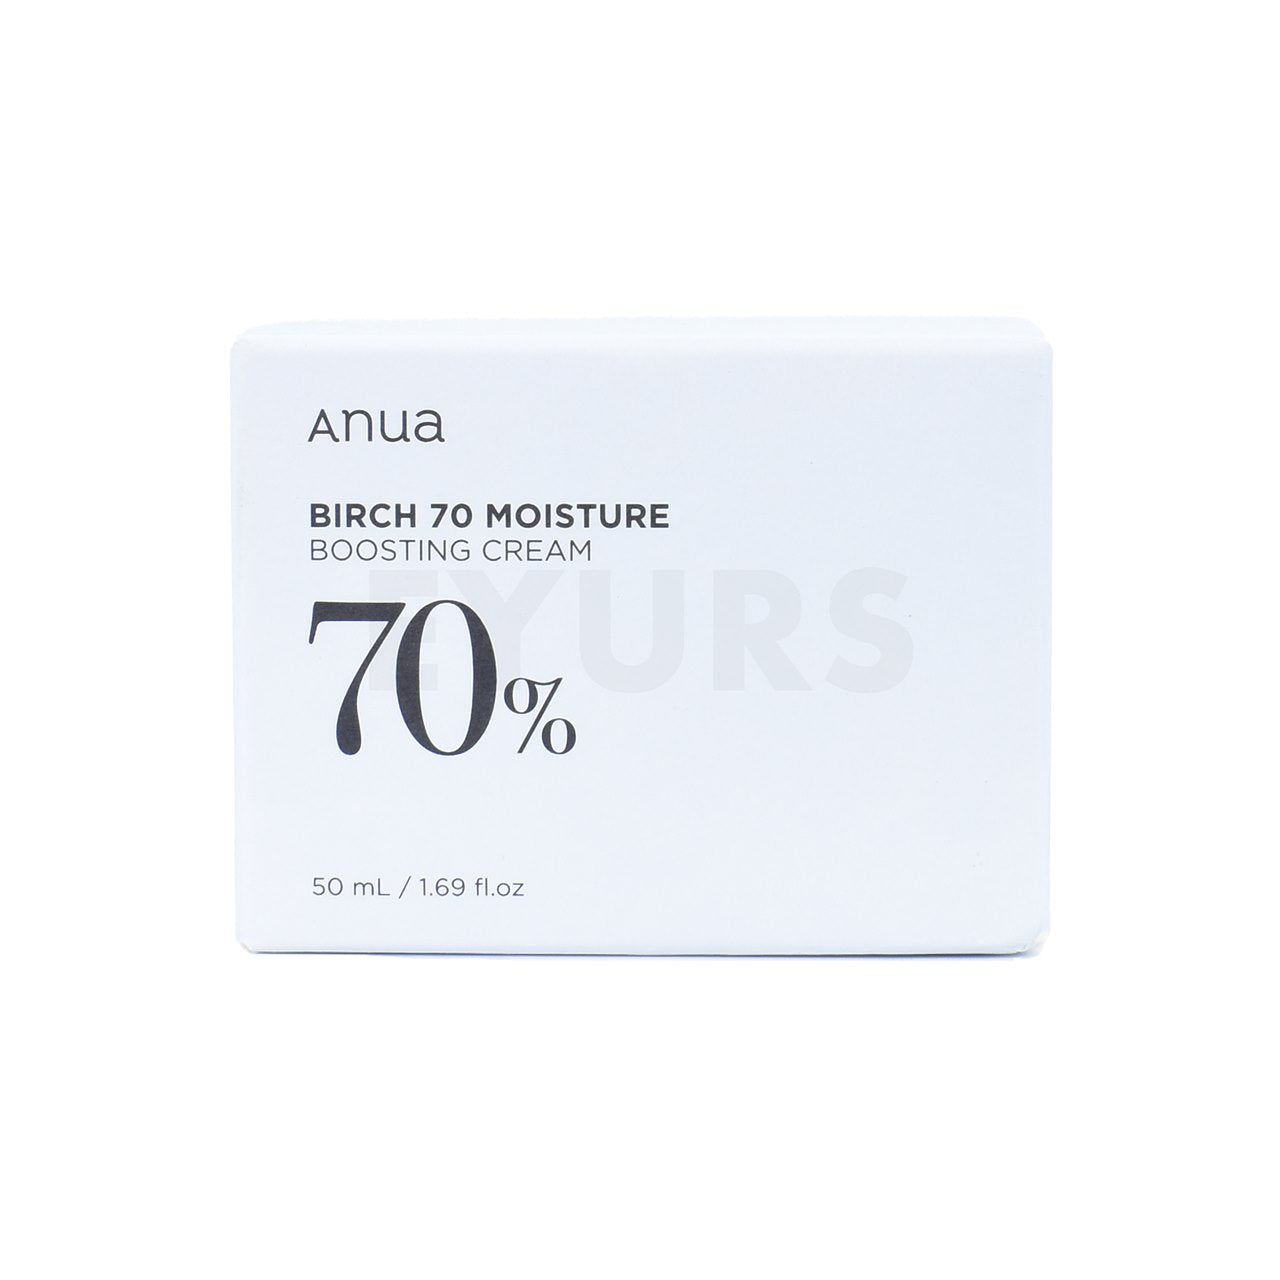  anua birch 70 moisture boosting cream front side packaging box